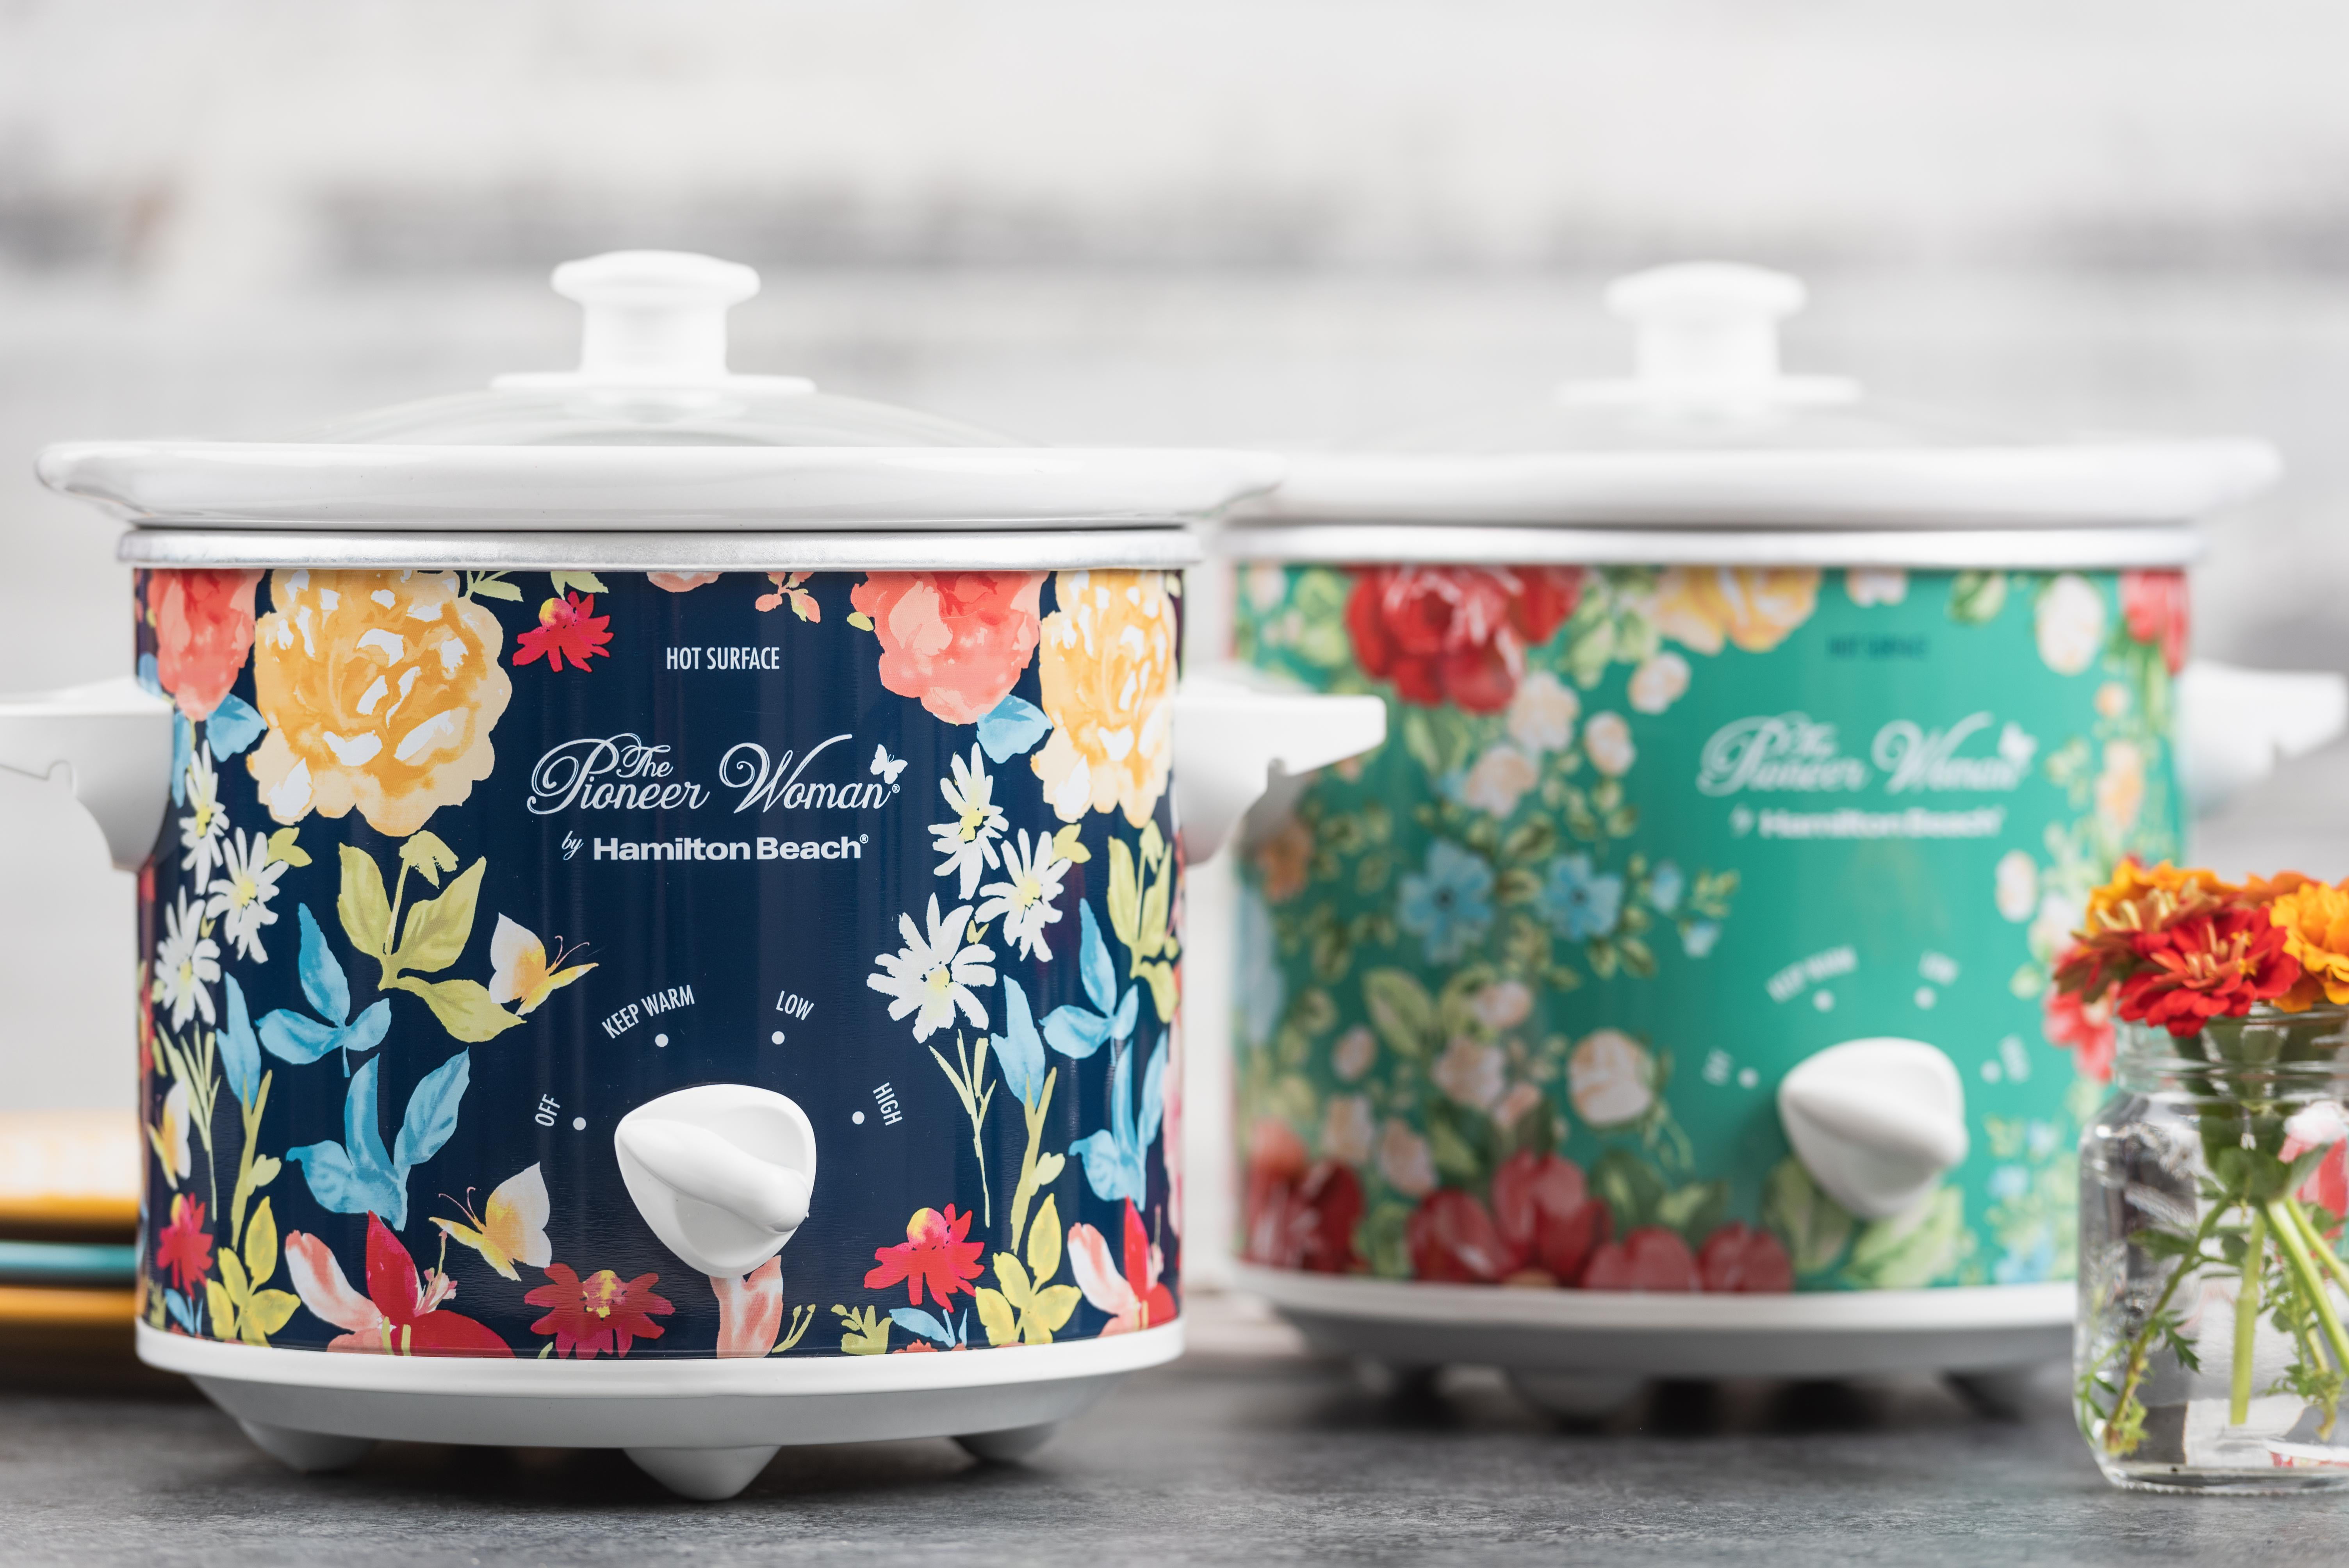 The Pioneer Woman 1.5 Quart Vintage Floral Slow Cooker Crock Pot Cooking  Pot, model #33016 by Hamilton Beach: Buy Online at Best Price in UAE 